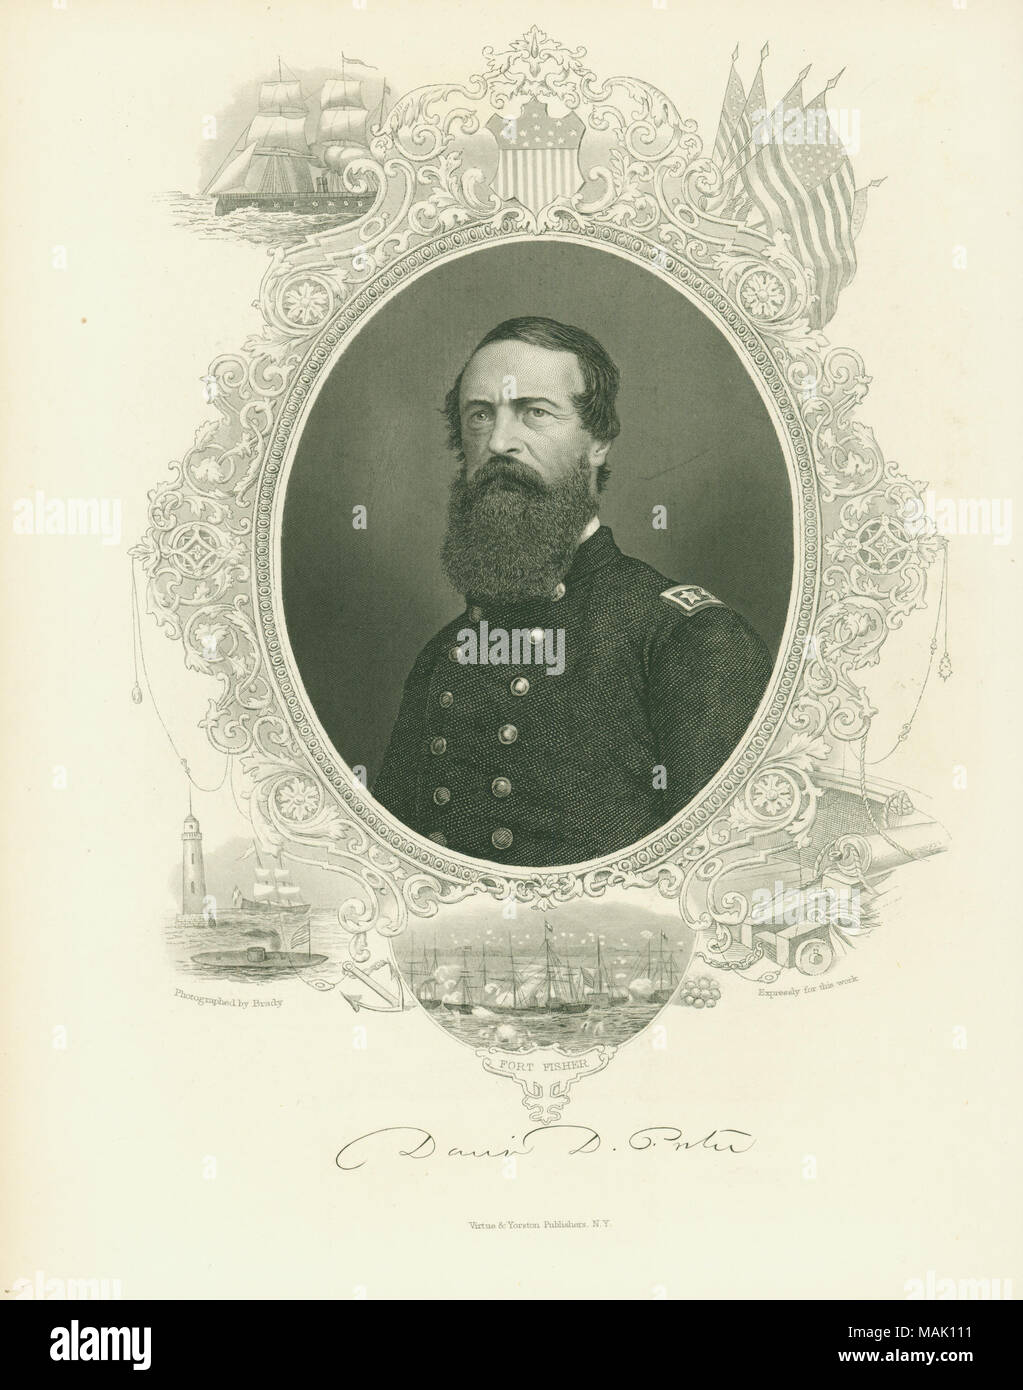 Bust portrait of a man in uniform with naval battle scenes and other smaller images printed around portrait. 'David D. Porter' (signature printed below image). 'From: The Great Civil War - Vol. III by Robt. Tomes, M. D. and Benjamin G. Smith New York Virtue and Yorston 12 Dey [?] Street 1865' (written on reverse side). Taken from 'The Great Civil War, vol. III.' by Robert Tomes, M.D. and Benjamin G. Smith. Book was published by Virtue and Yorston, 1865. Title: David D. Porter, Admiral (Union).  . between 1861 and 1865. Stock Photo